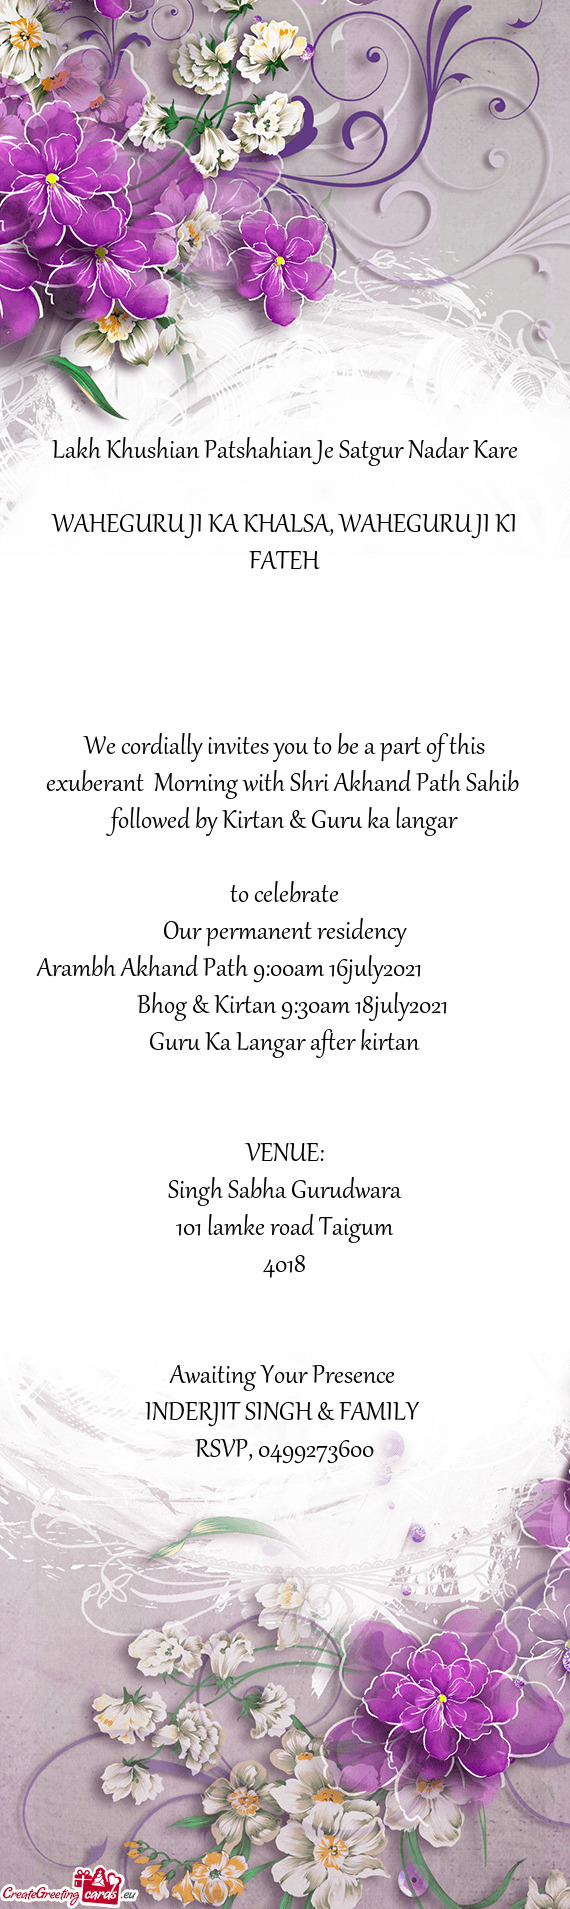 We cordially invites you to be a part of this exuberant Morning with Shri Akhand Path Sahib follow